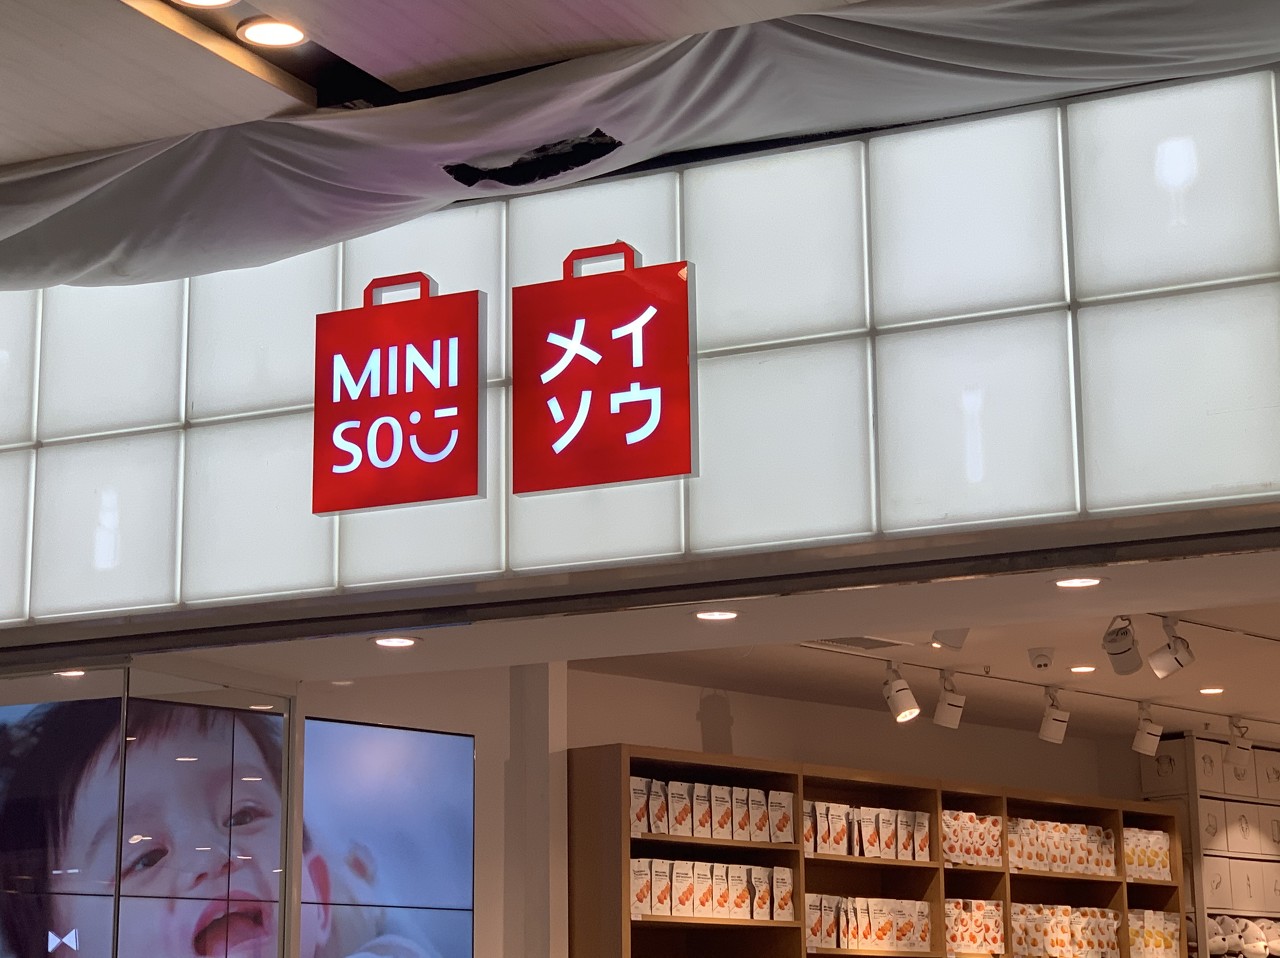 Tencent-backed retailer Miniso sets up USD 15 million buyback fund for dangerous recalled products